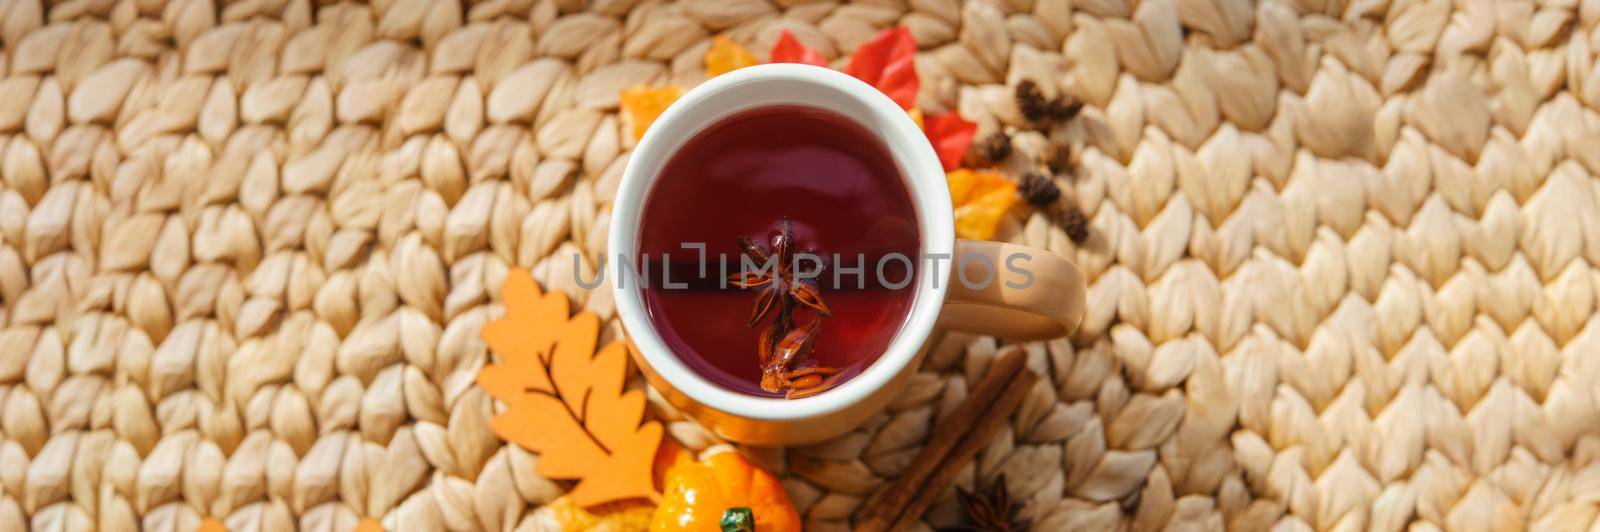 Karkade tea in an orange cup with autumn attributes. The concept of the autumn season, natural colors. by Annu1tochka